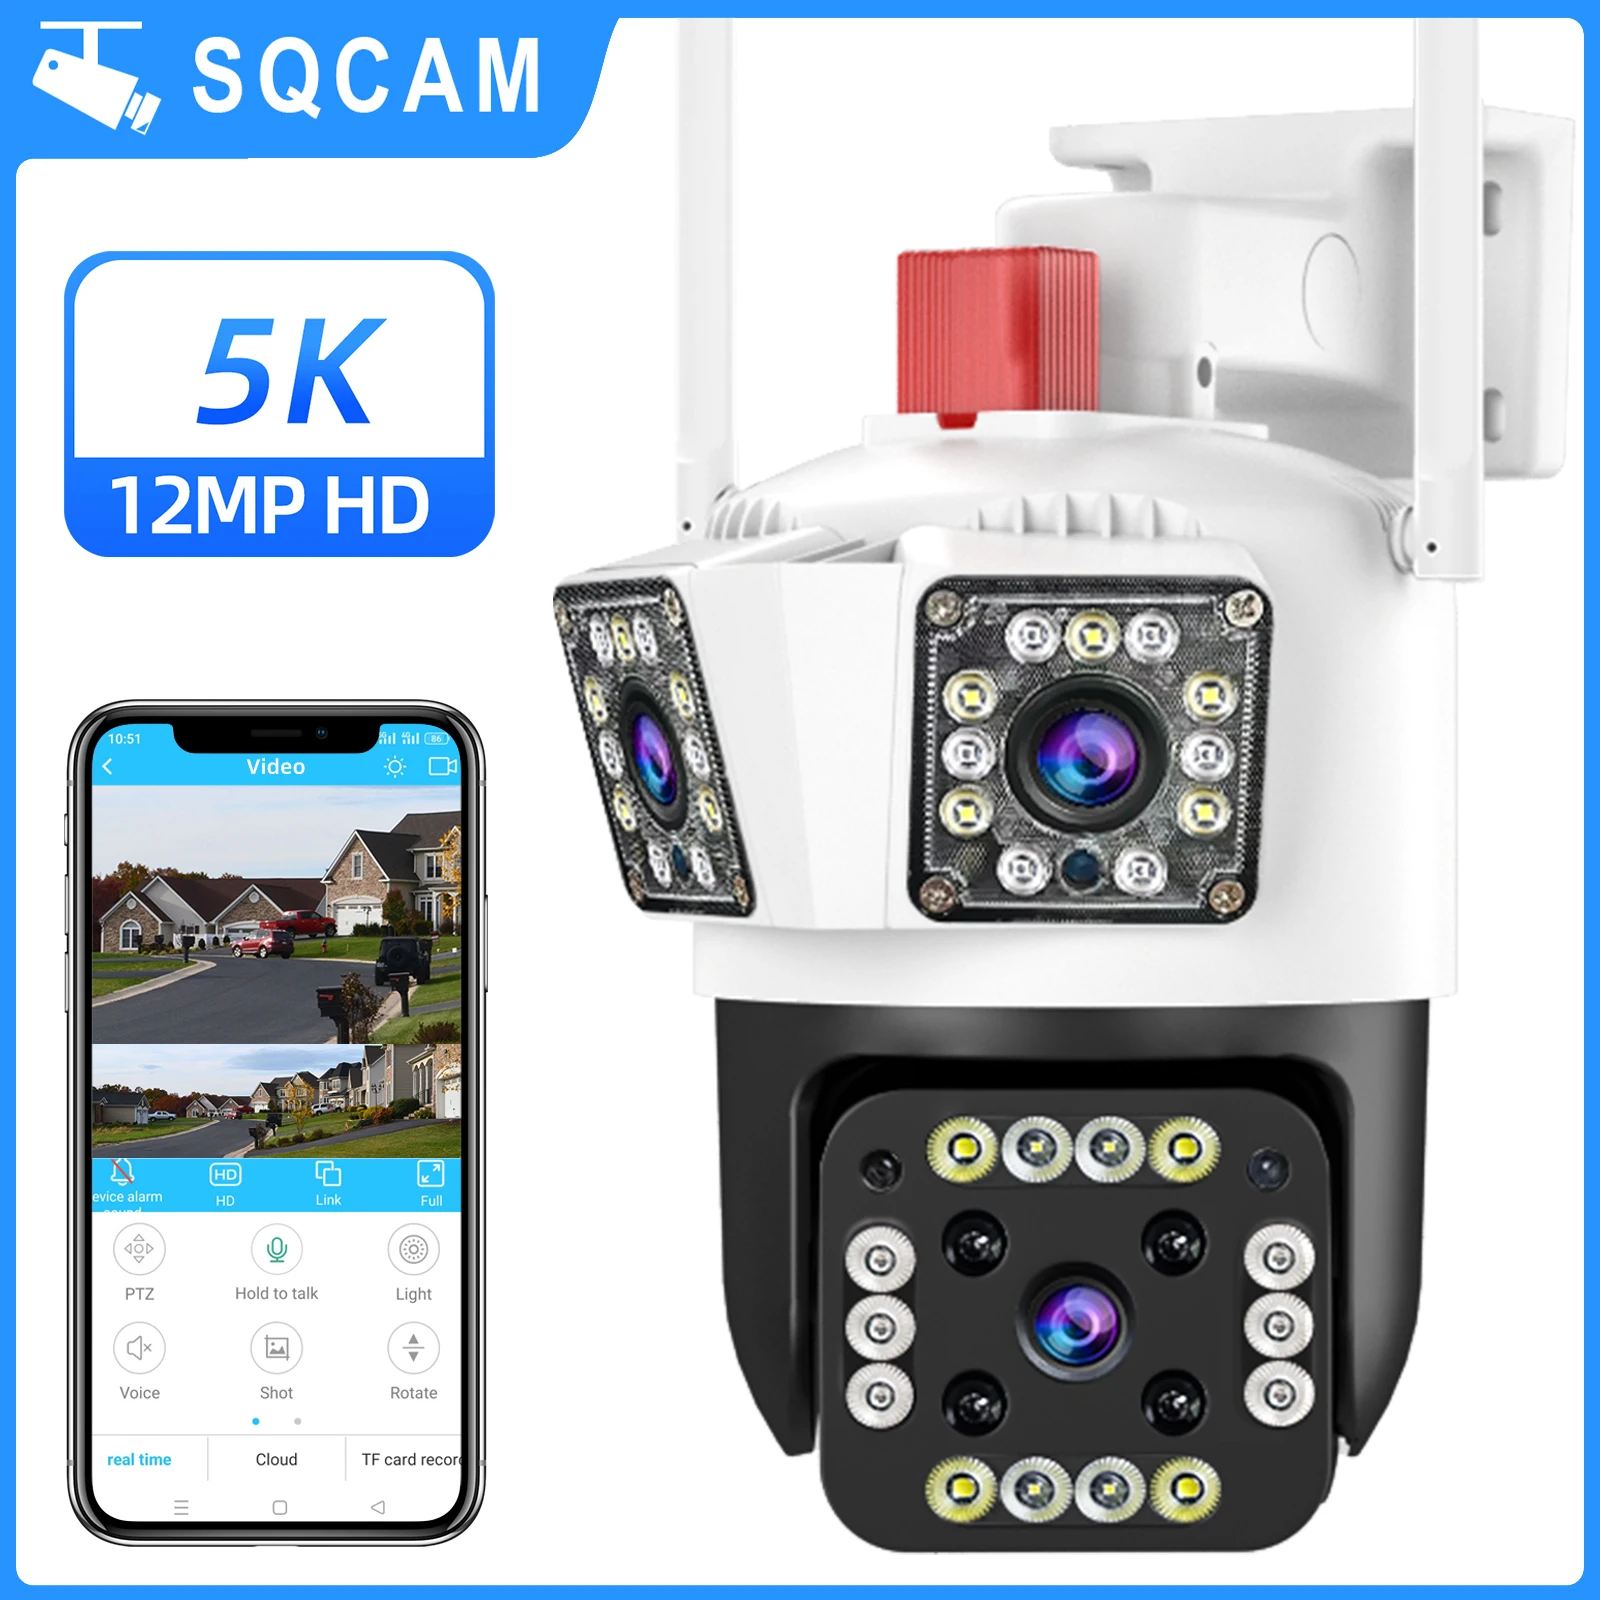 SQCAM Wifi IP Camera Surveillance 3 Lens Cameras Waterproof Security System Video 12MP HD For Outdoor Auto Tracking PTZ Cameras wjg 6k 12mp wifi ip camera security protection motion tracking three lens three screen outdoor waterproof surveillance cameras